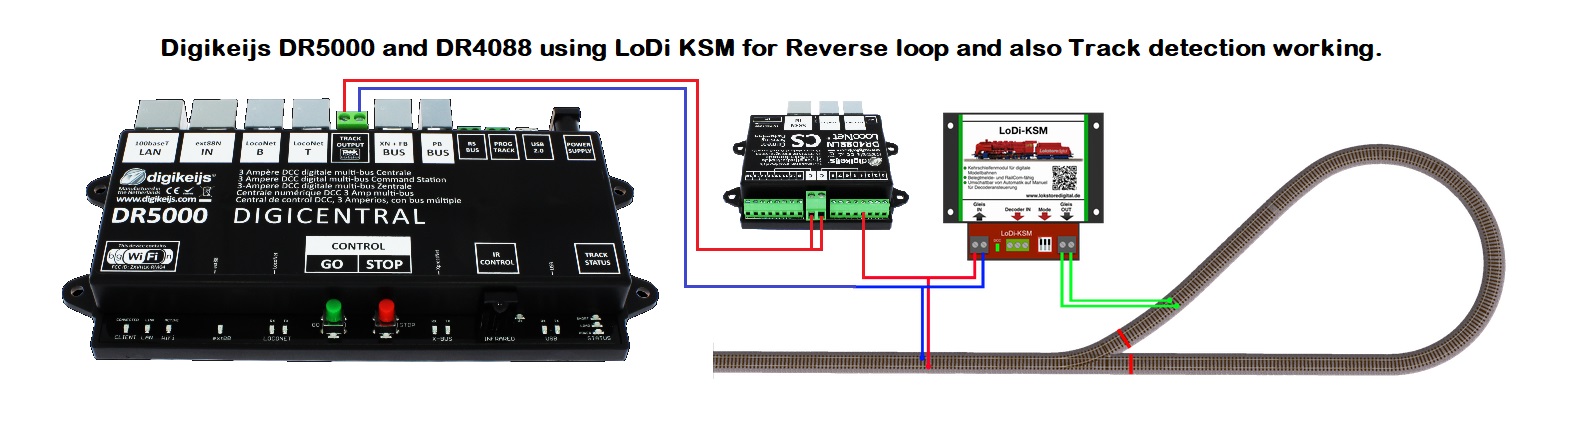 Revere loop and track detection